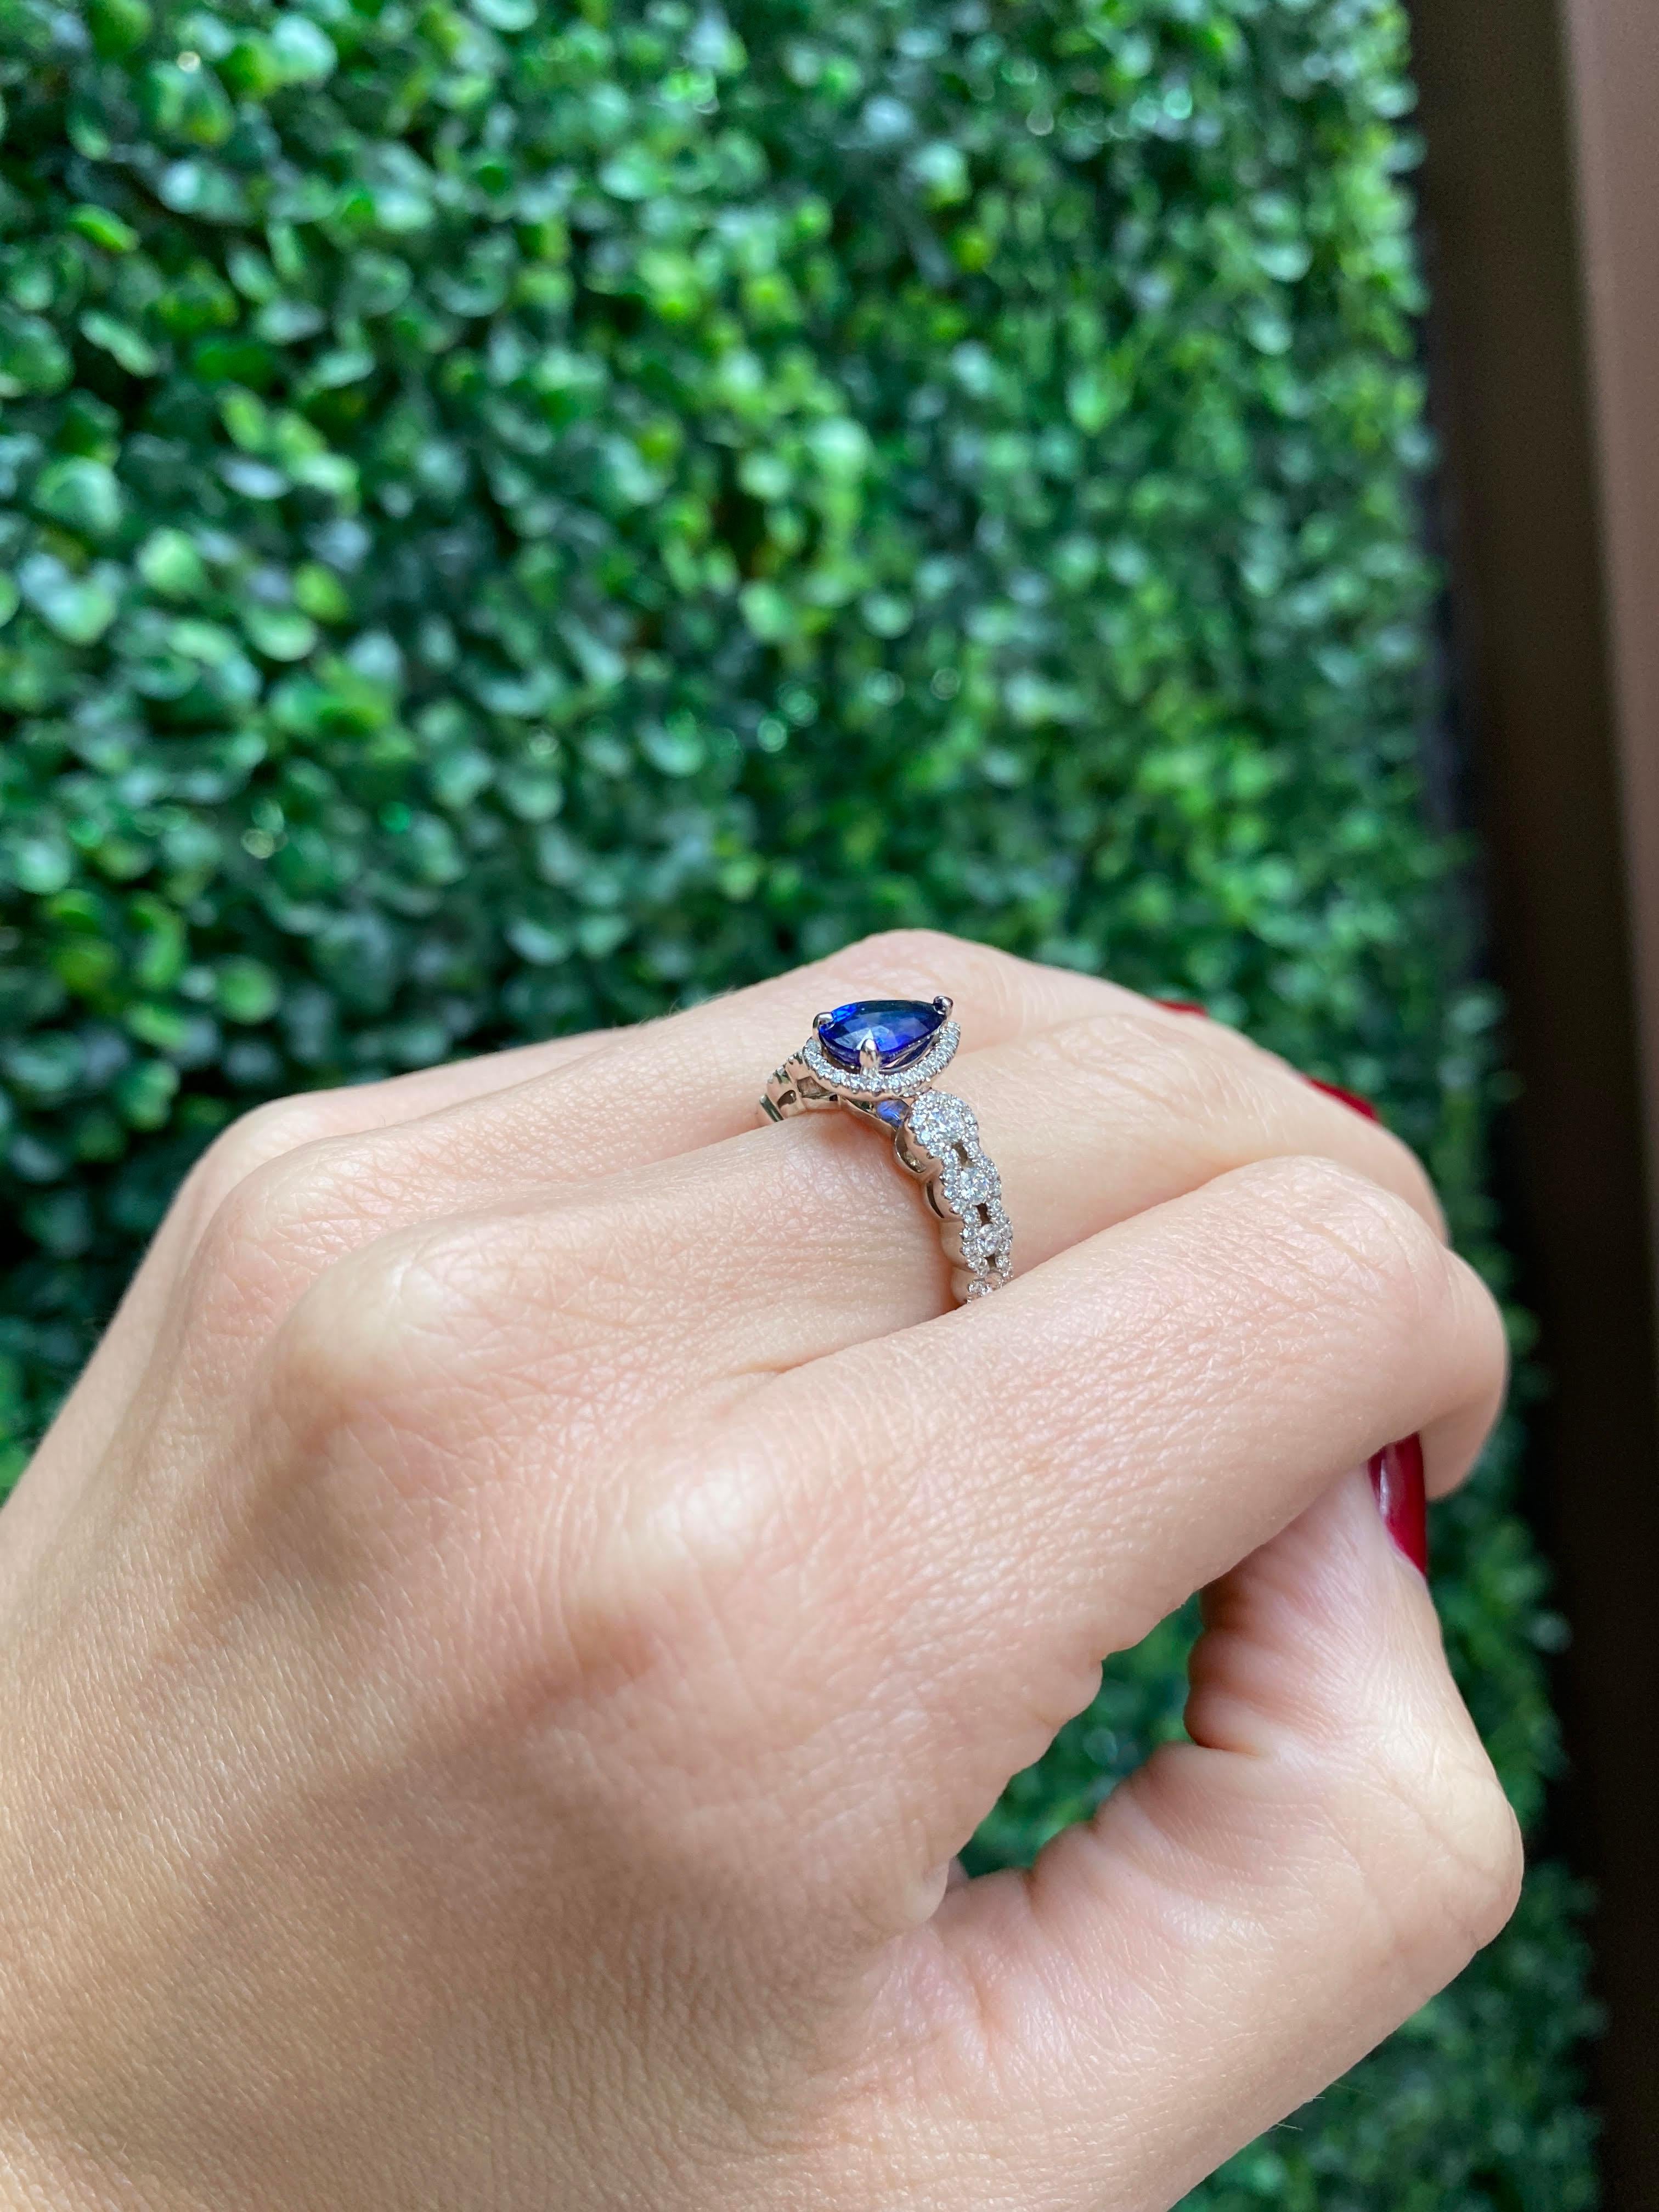 Women's or Men's 1.31 Carat Pear Shape Blue Sapphire Cocktail Ring with Diamond Halo For Sale